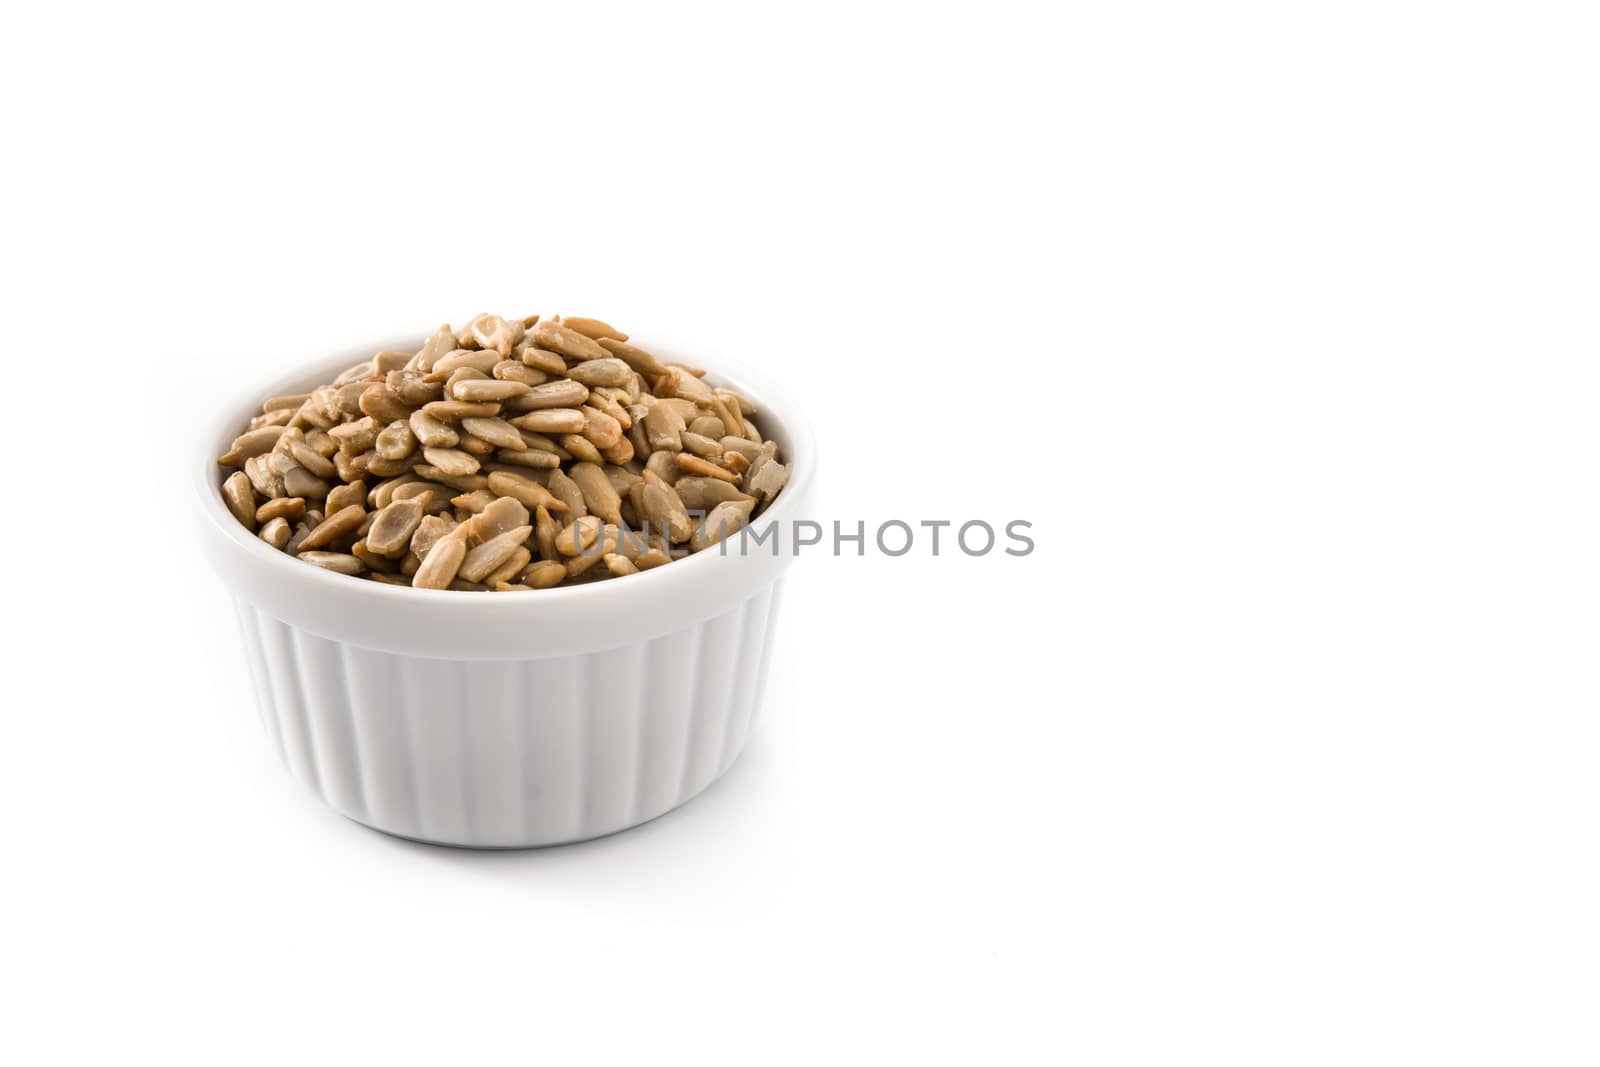 Sunflower seeds in bowl by chandlervid85